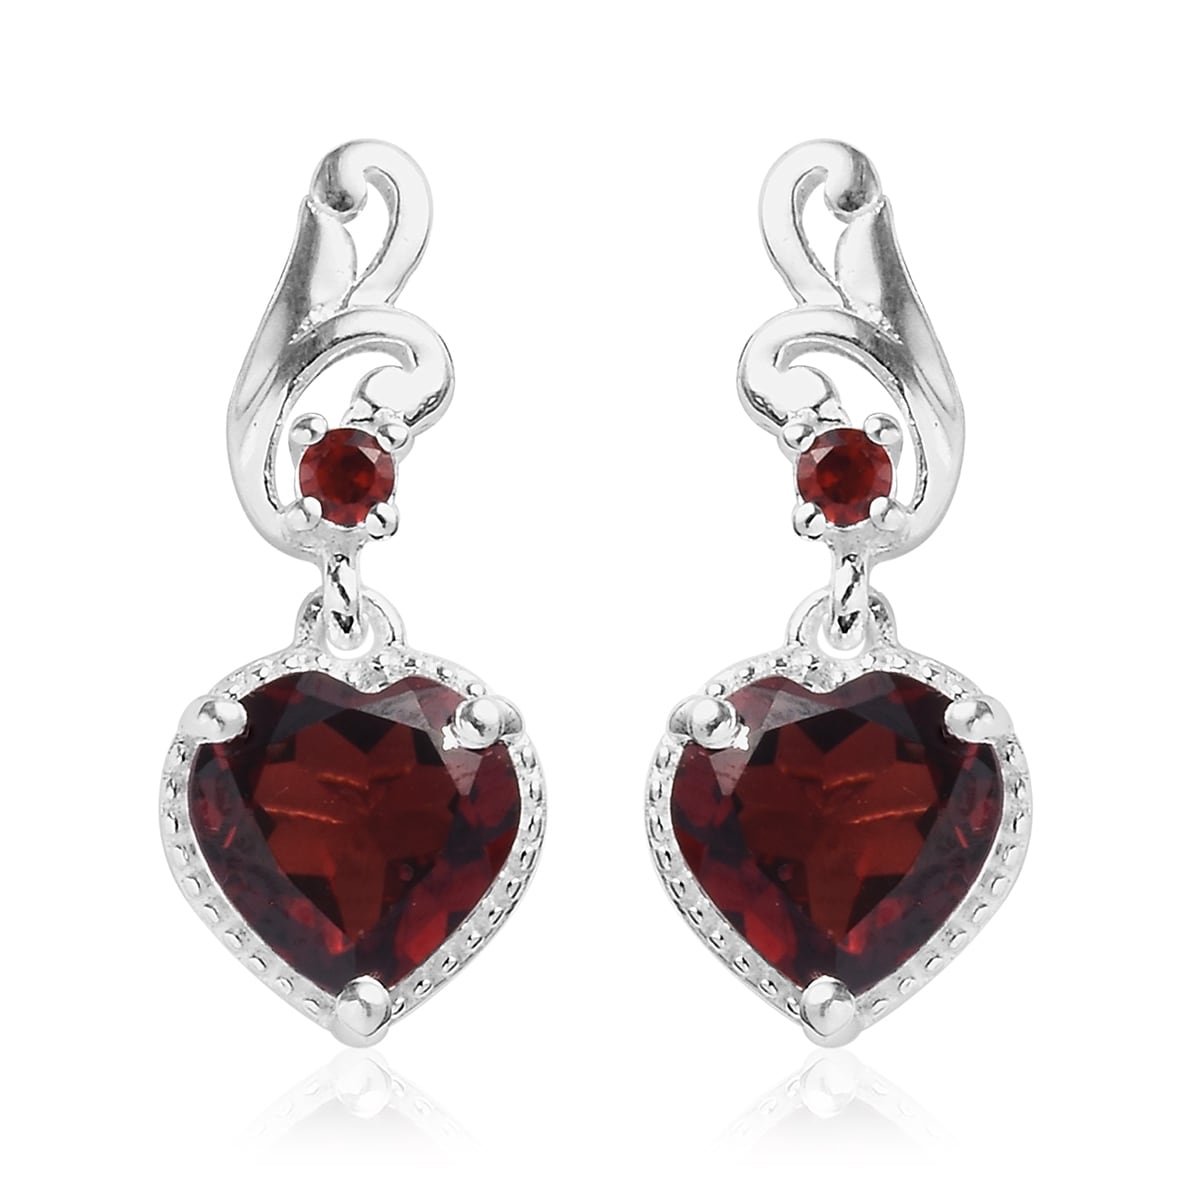 Superb Dangly Sterling Silver and Garnet Heart Ear Rings January Birthstone